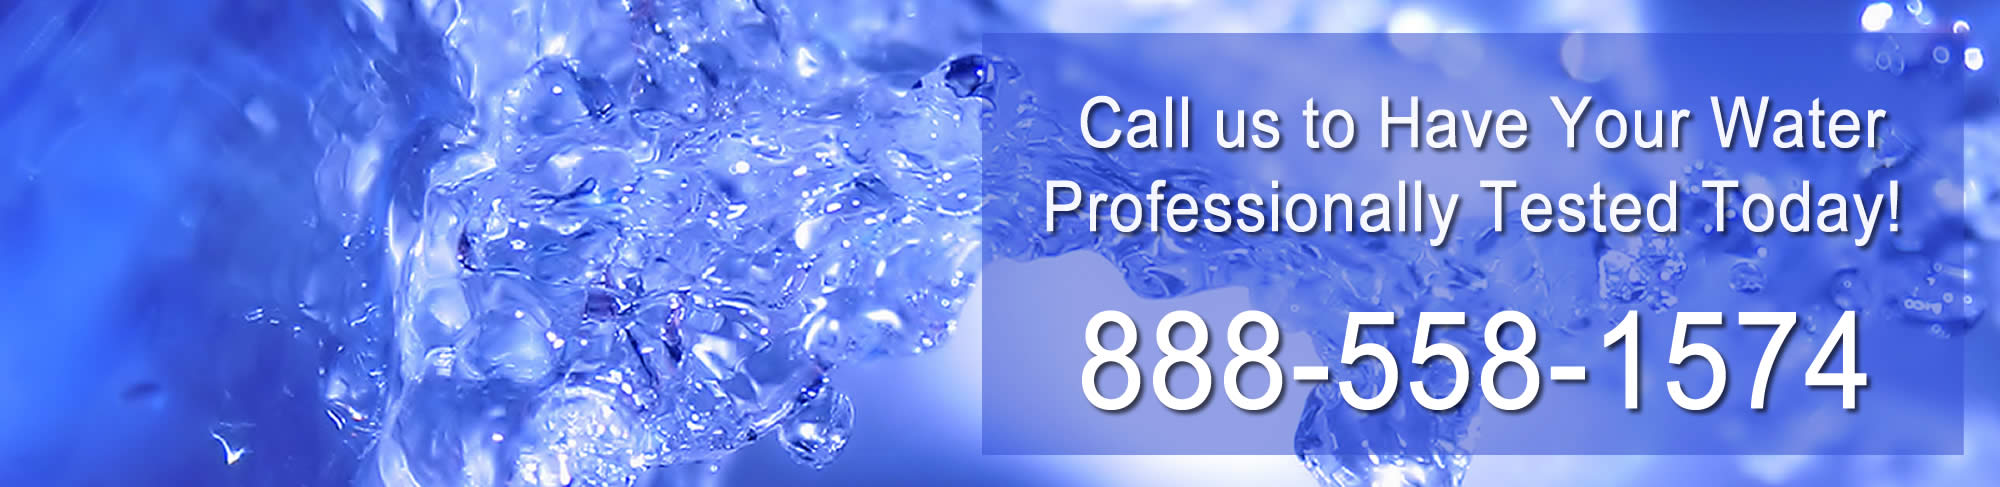 Specializing in Trumbull CT Water Testing and Analysis